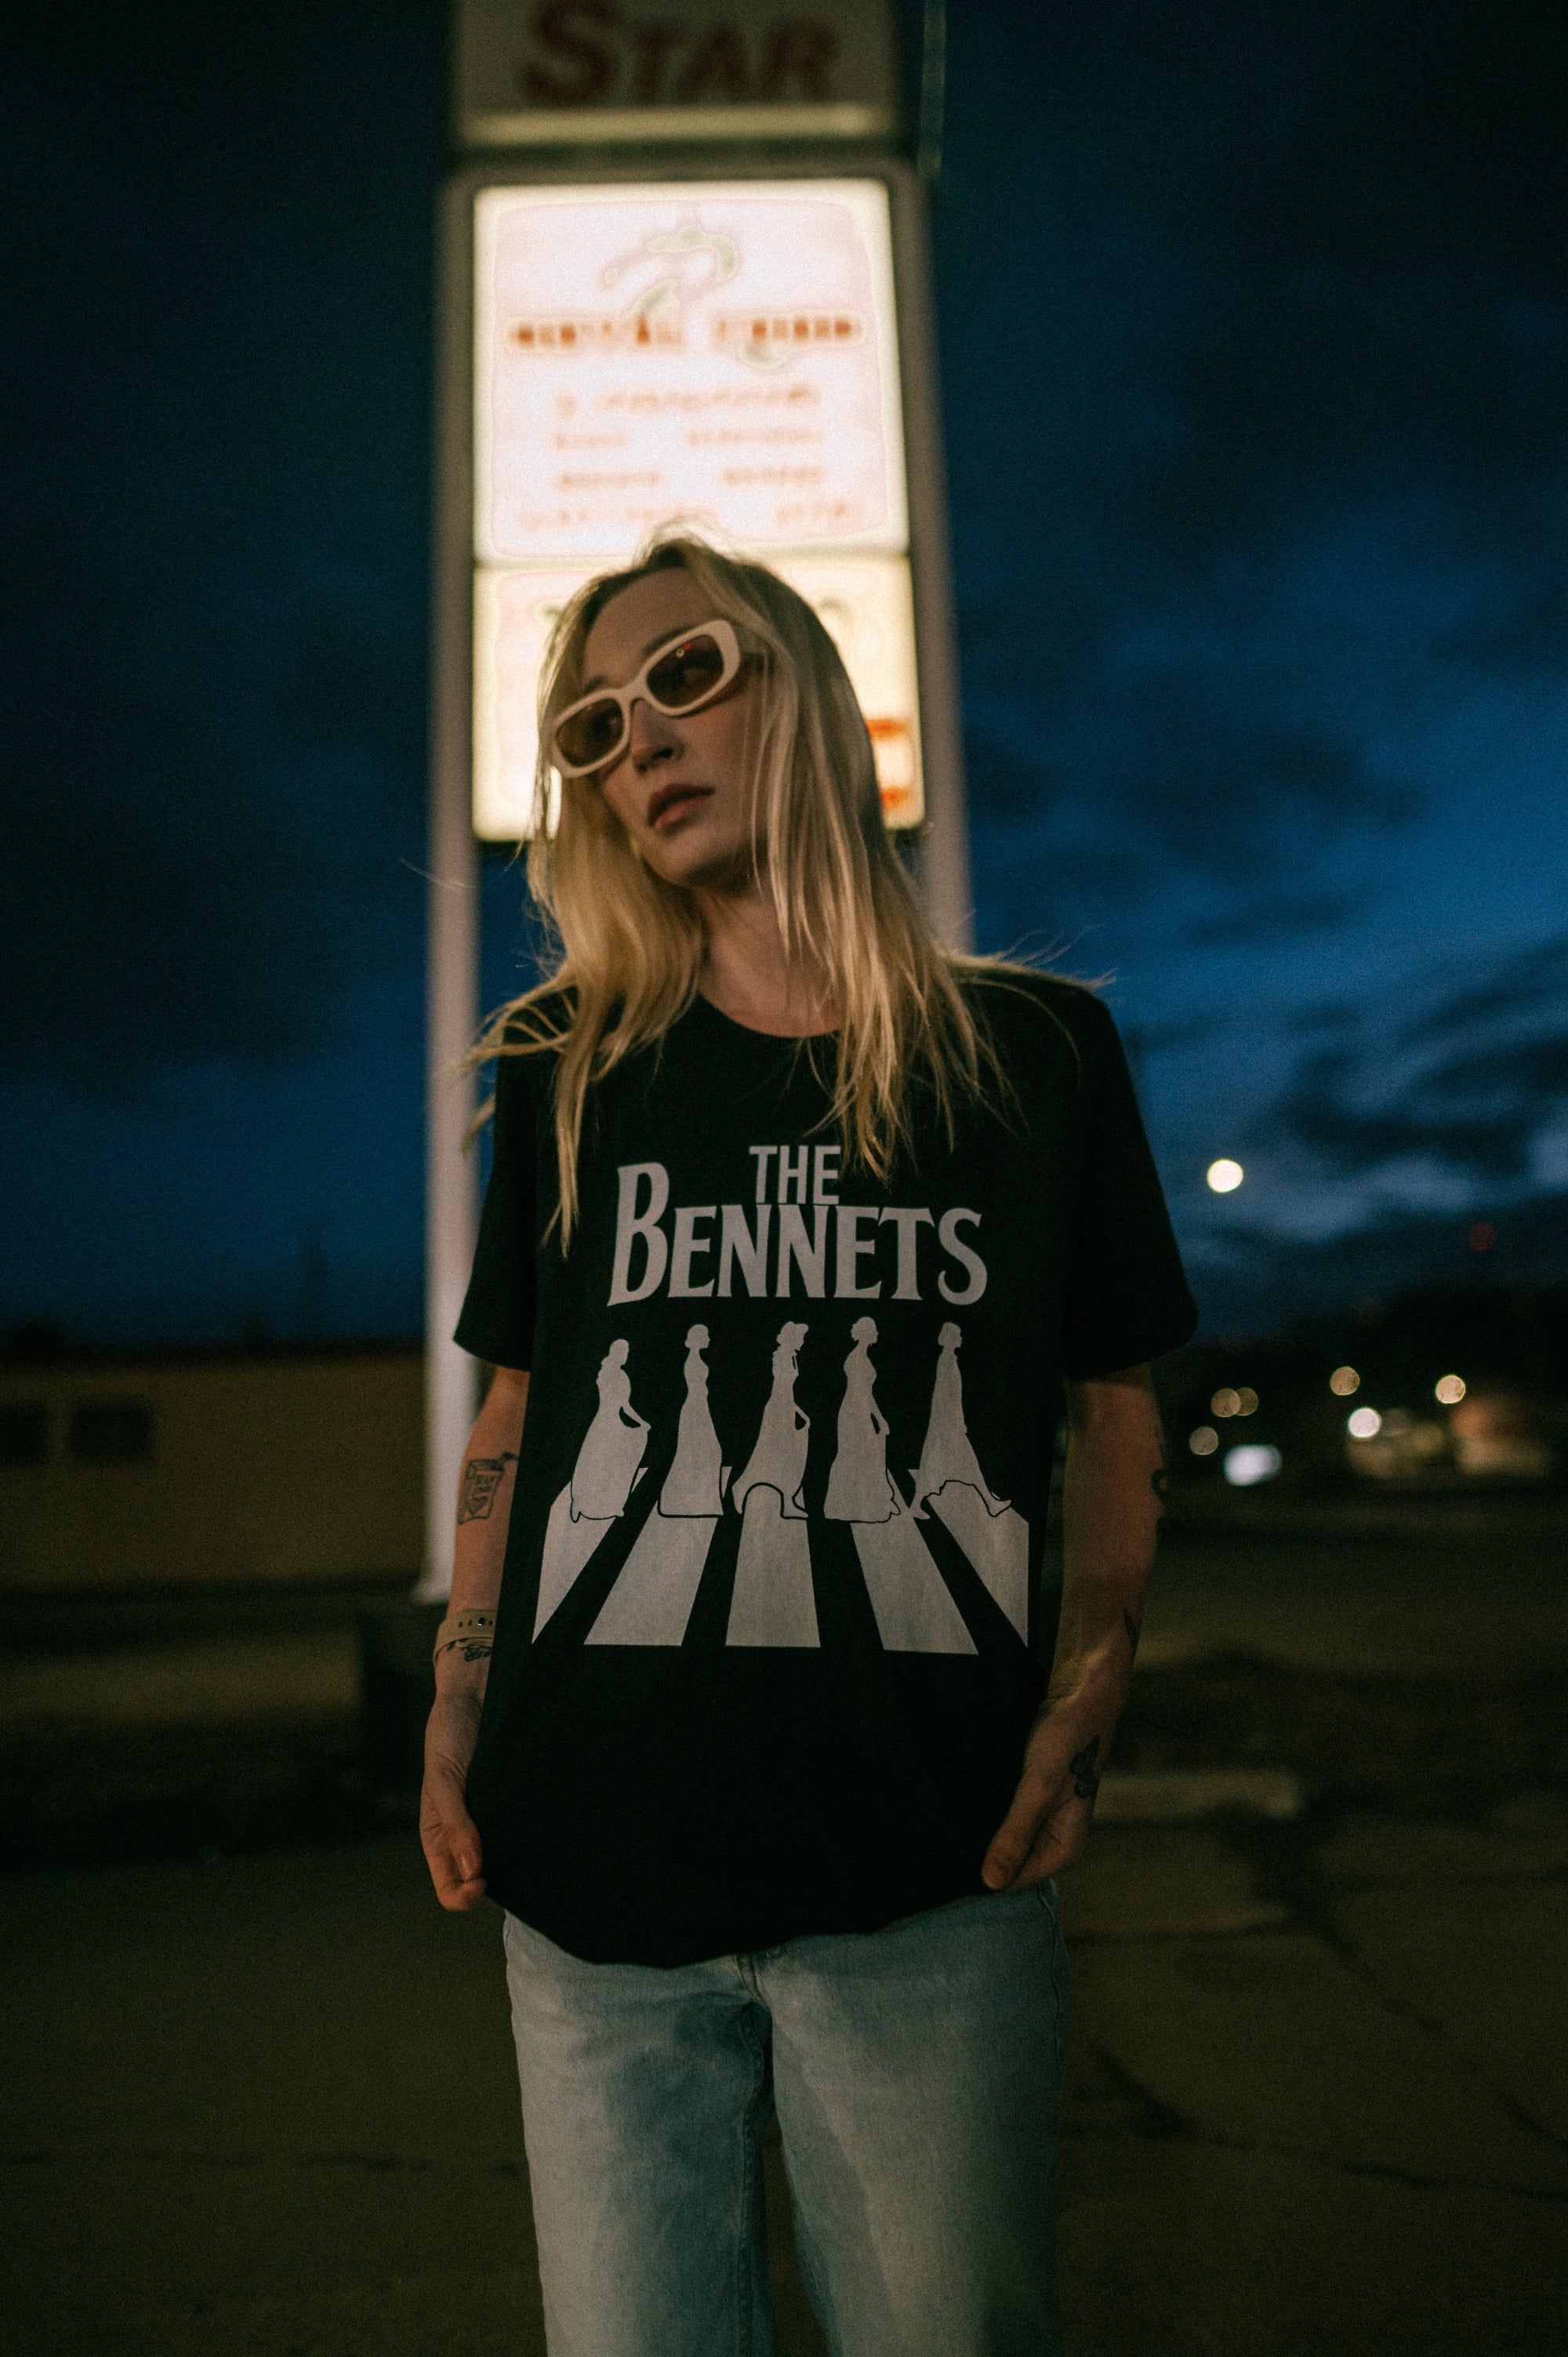 The Bennets Band Tee